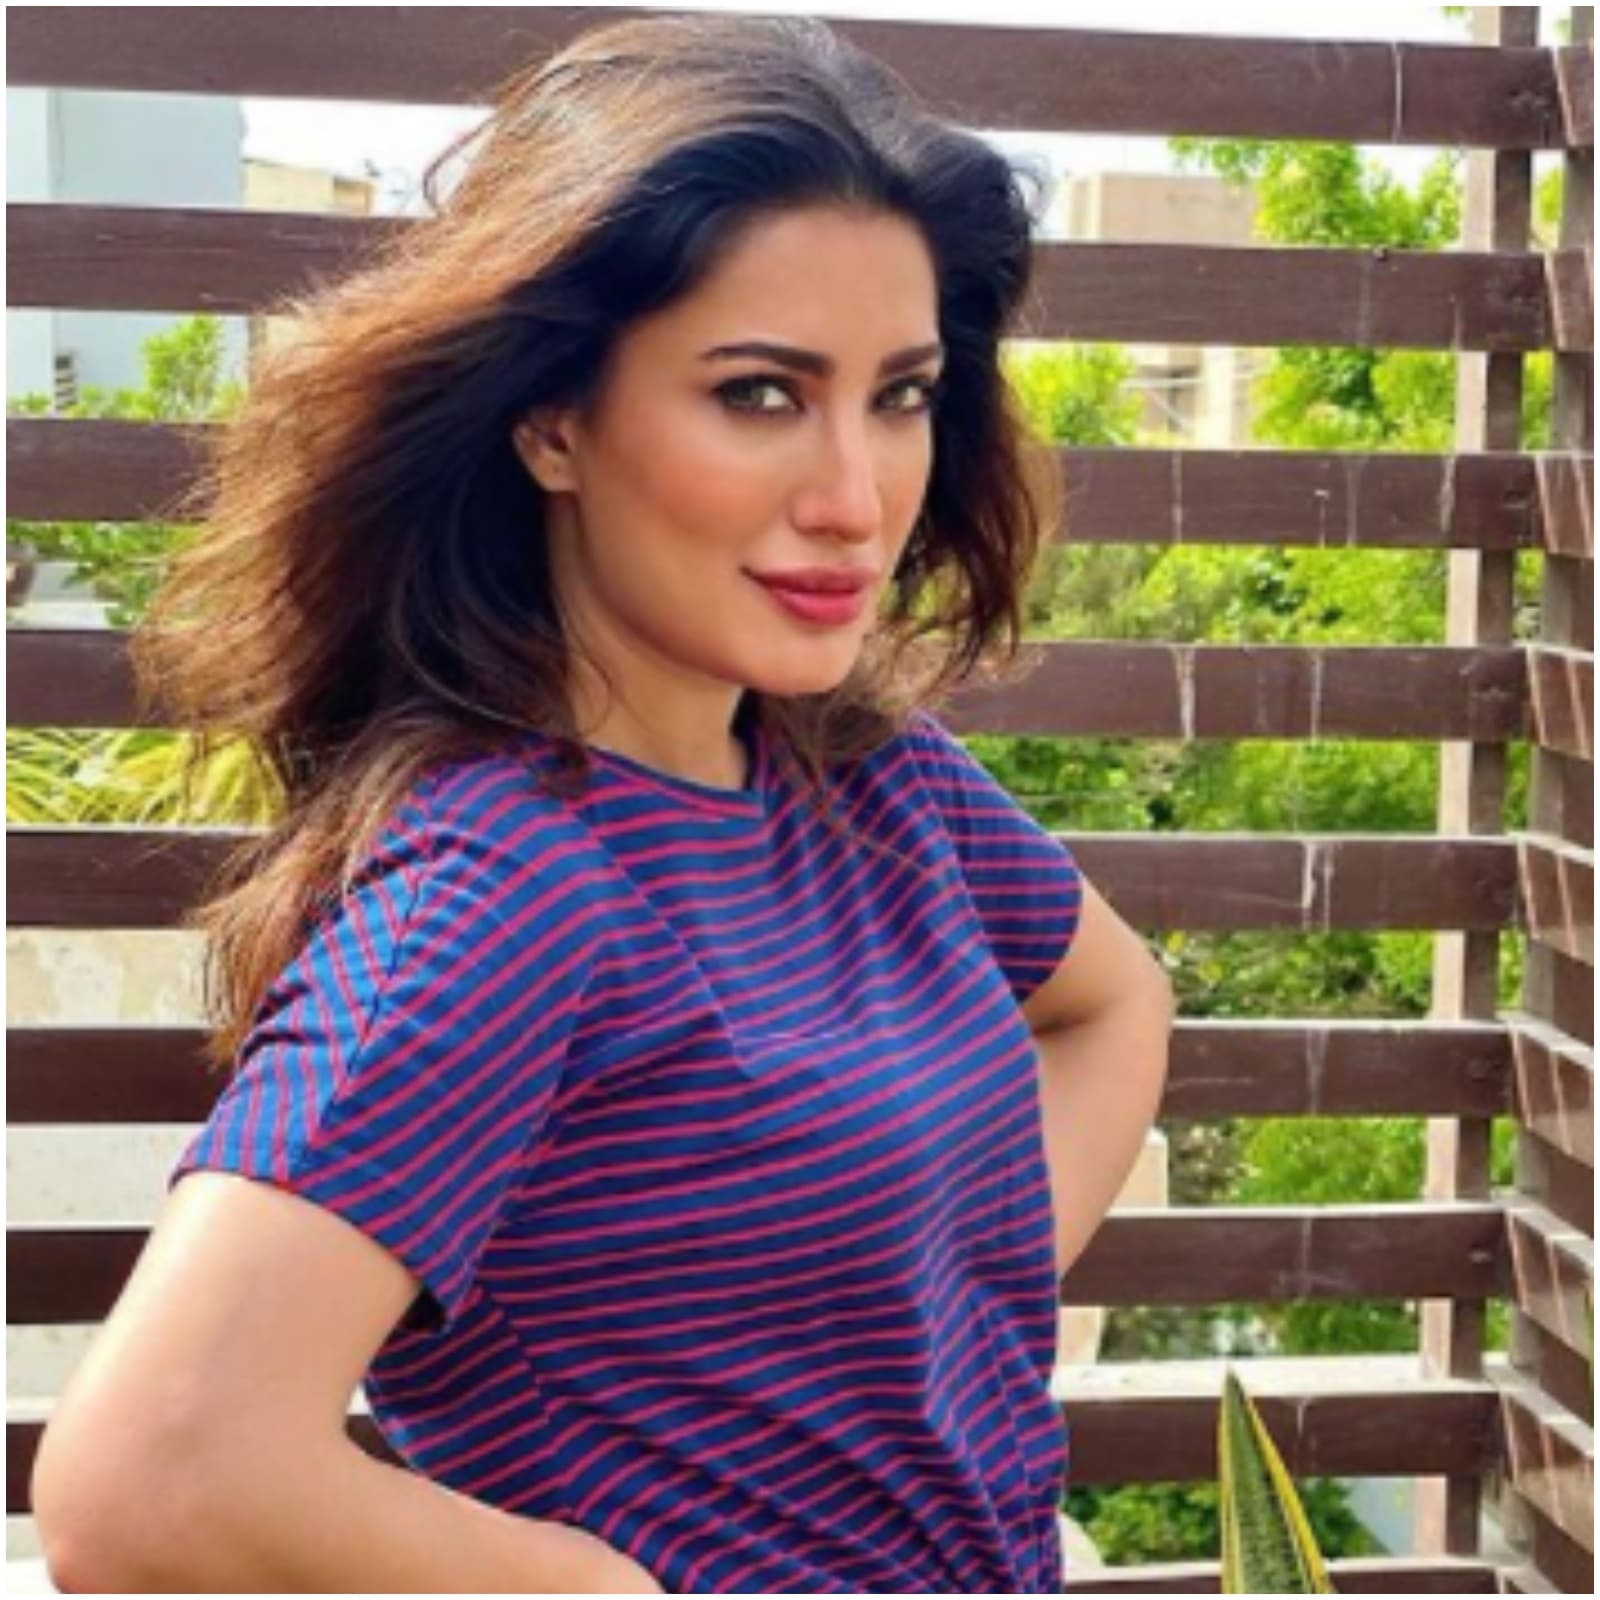 Mehwish Hayat X Videos - Pakistani Actress Mehwish Hayat's Independence Day Post Goes Viral After  Netizens Comment on Her Bra - News18